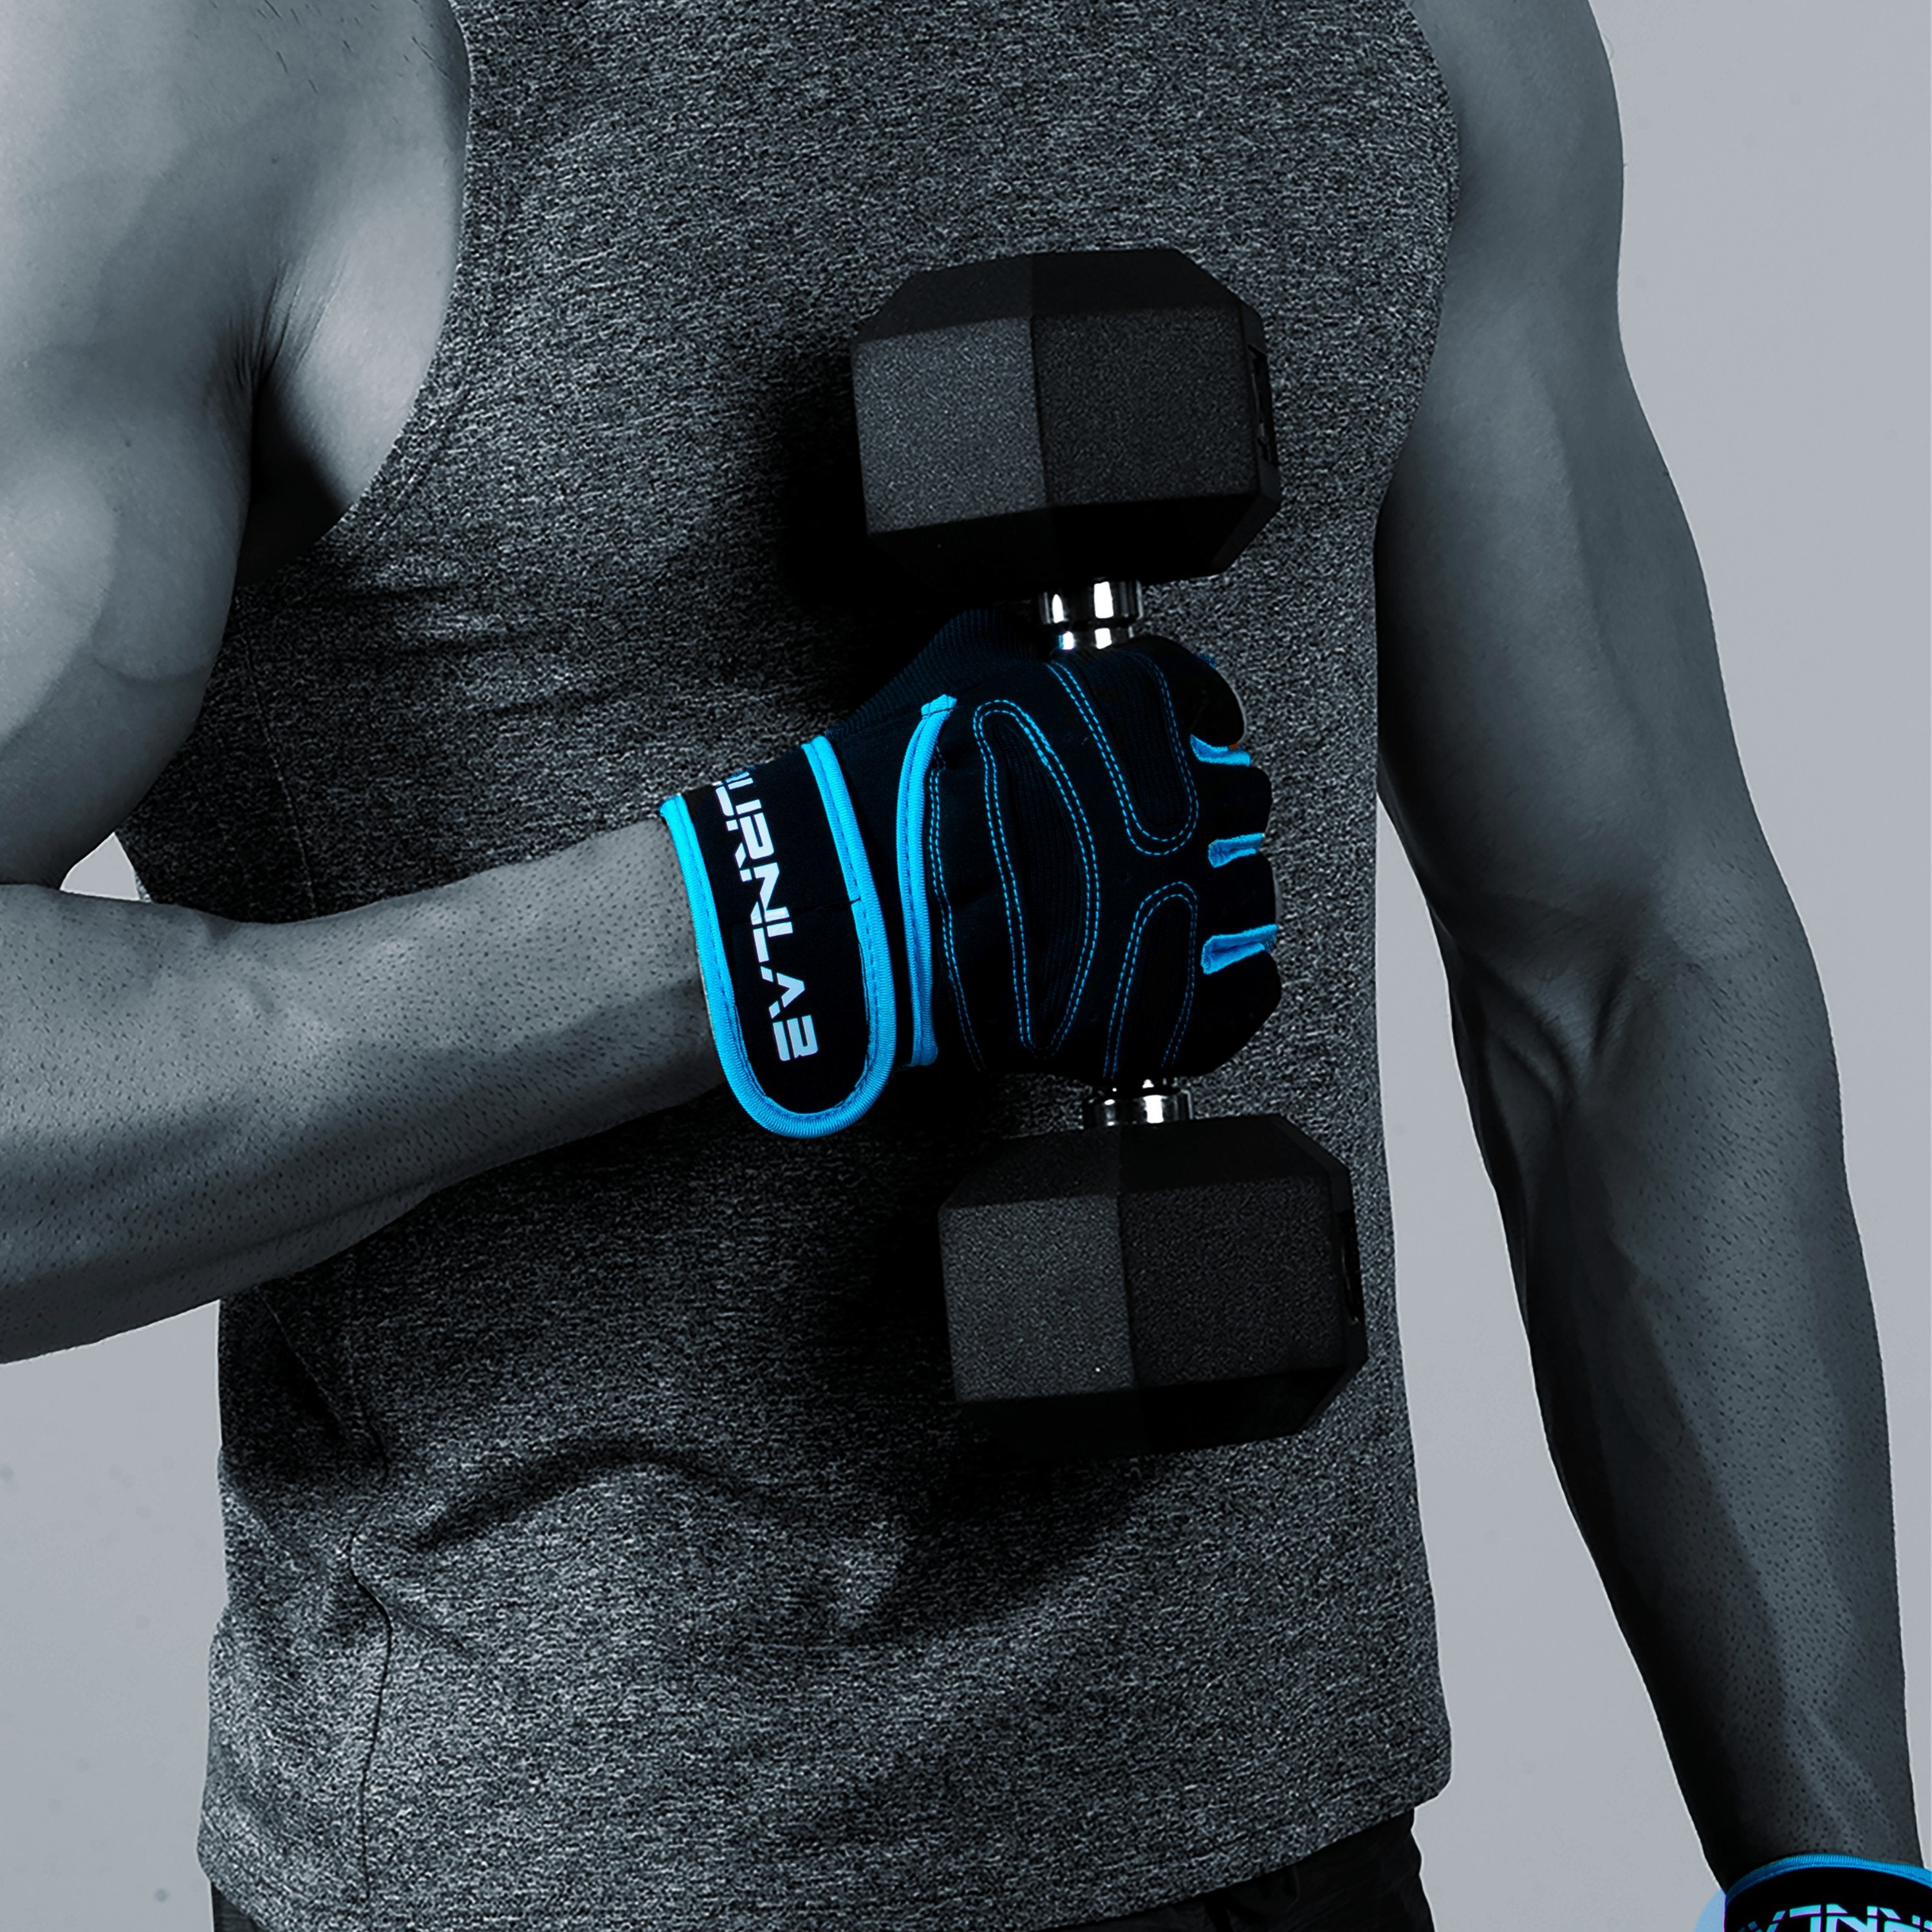  Ventilated Workout Gloves with Elastic Wrist Wraps